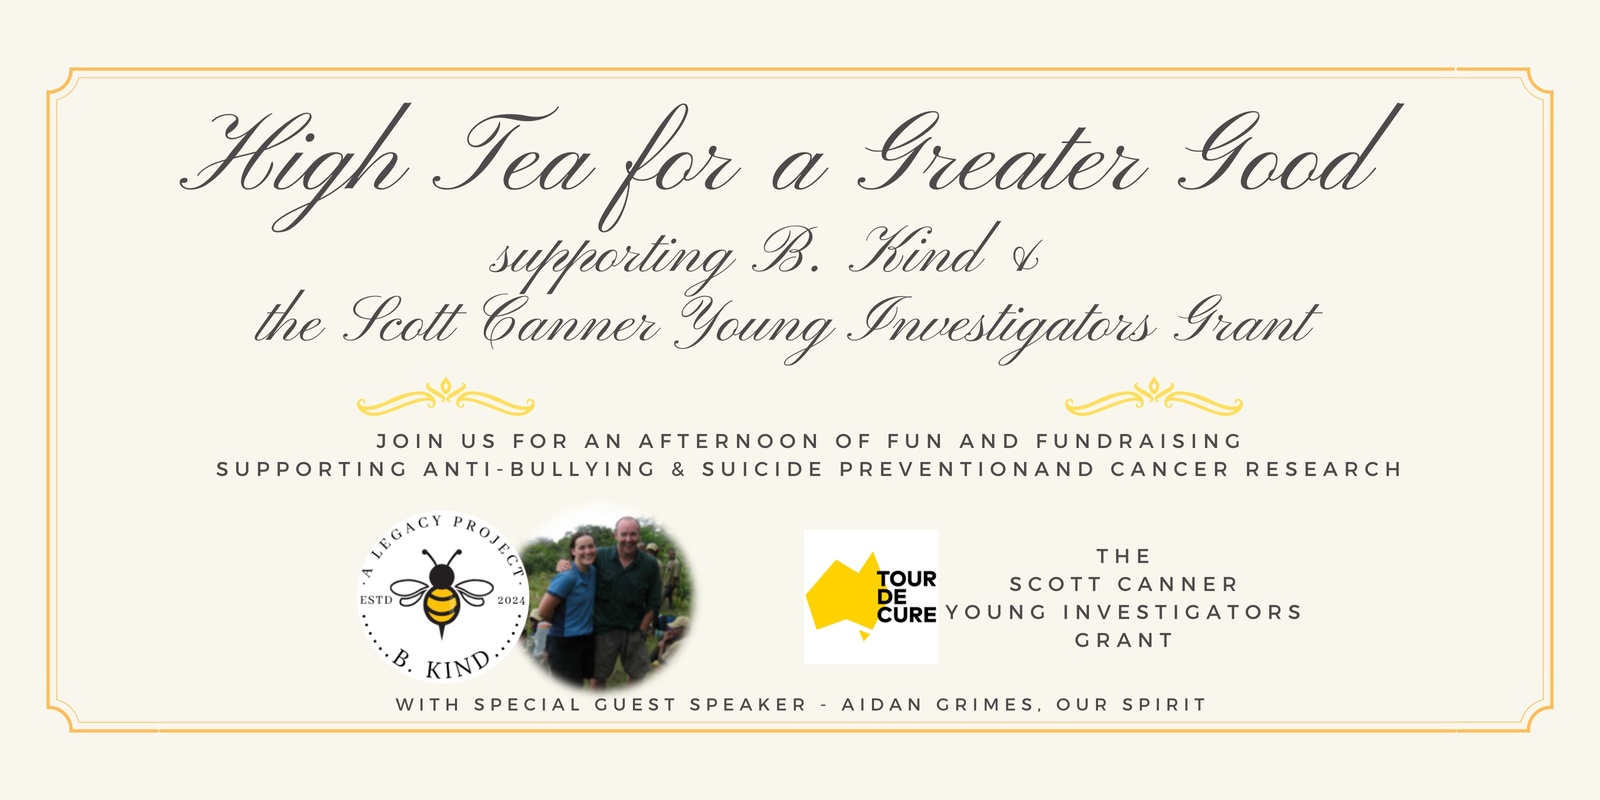 Banner image for High Tea for a Greater Good